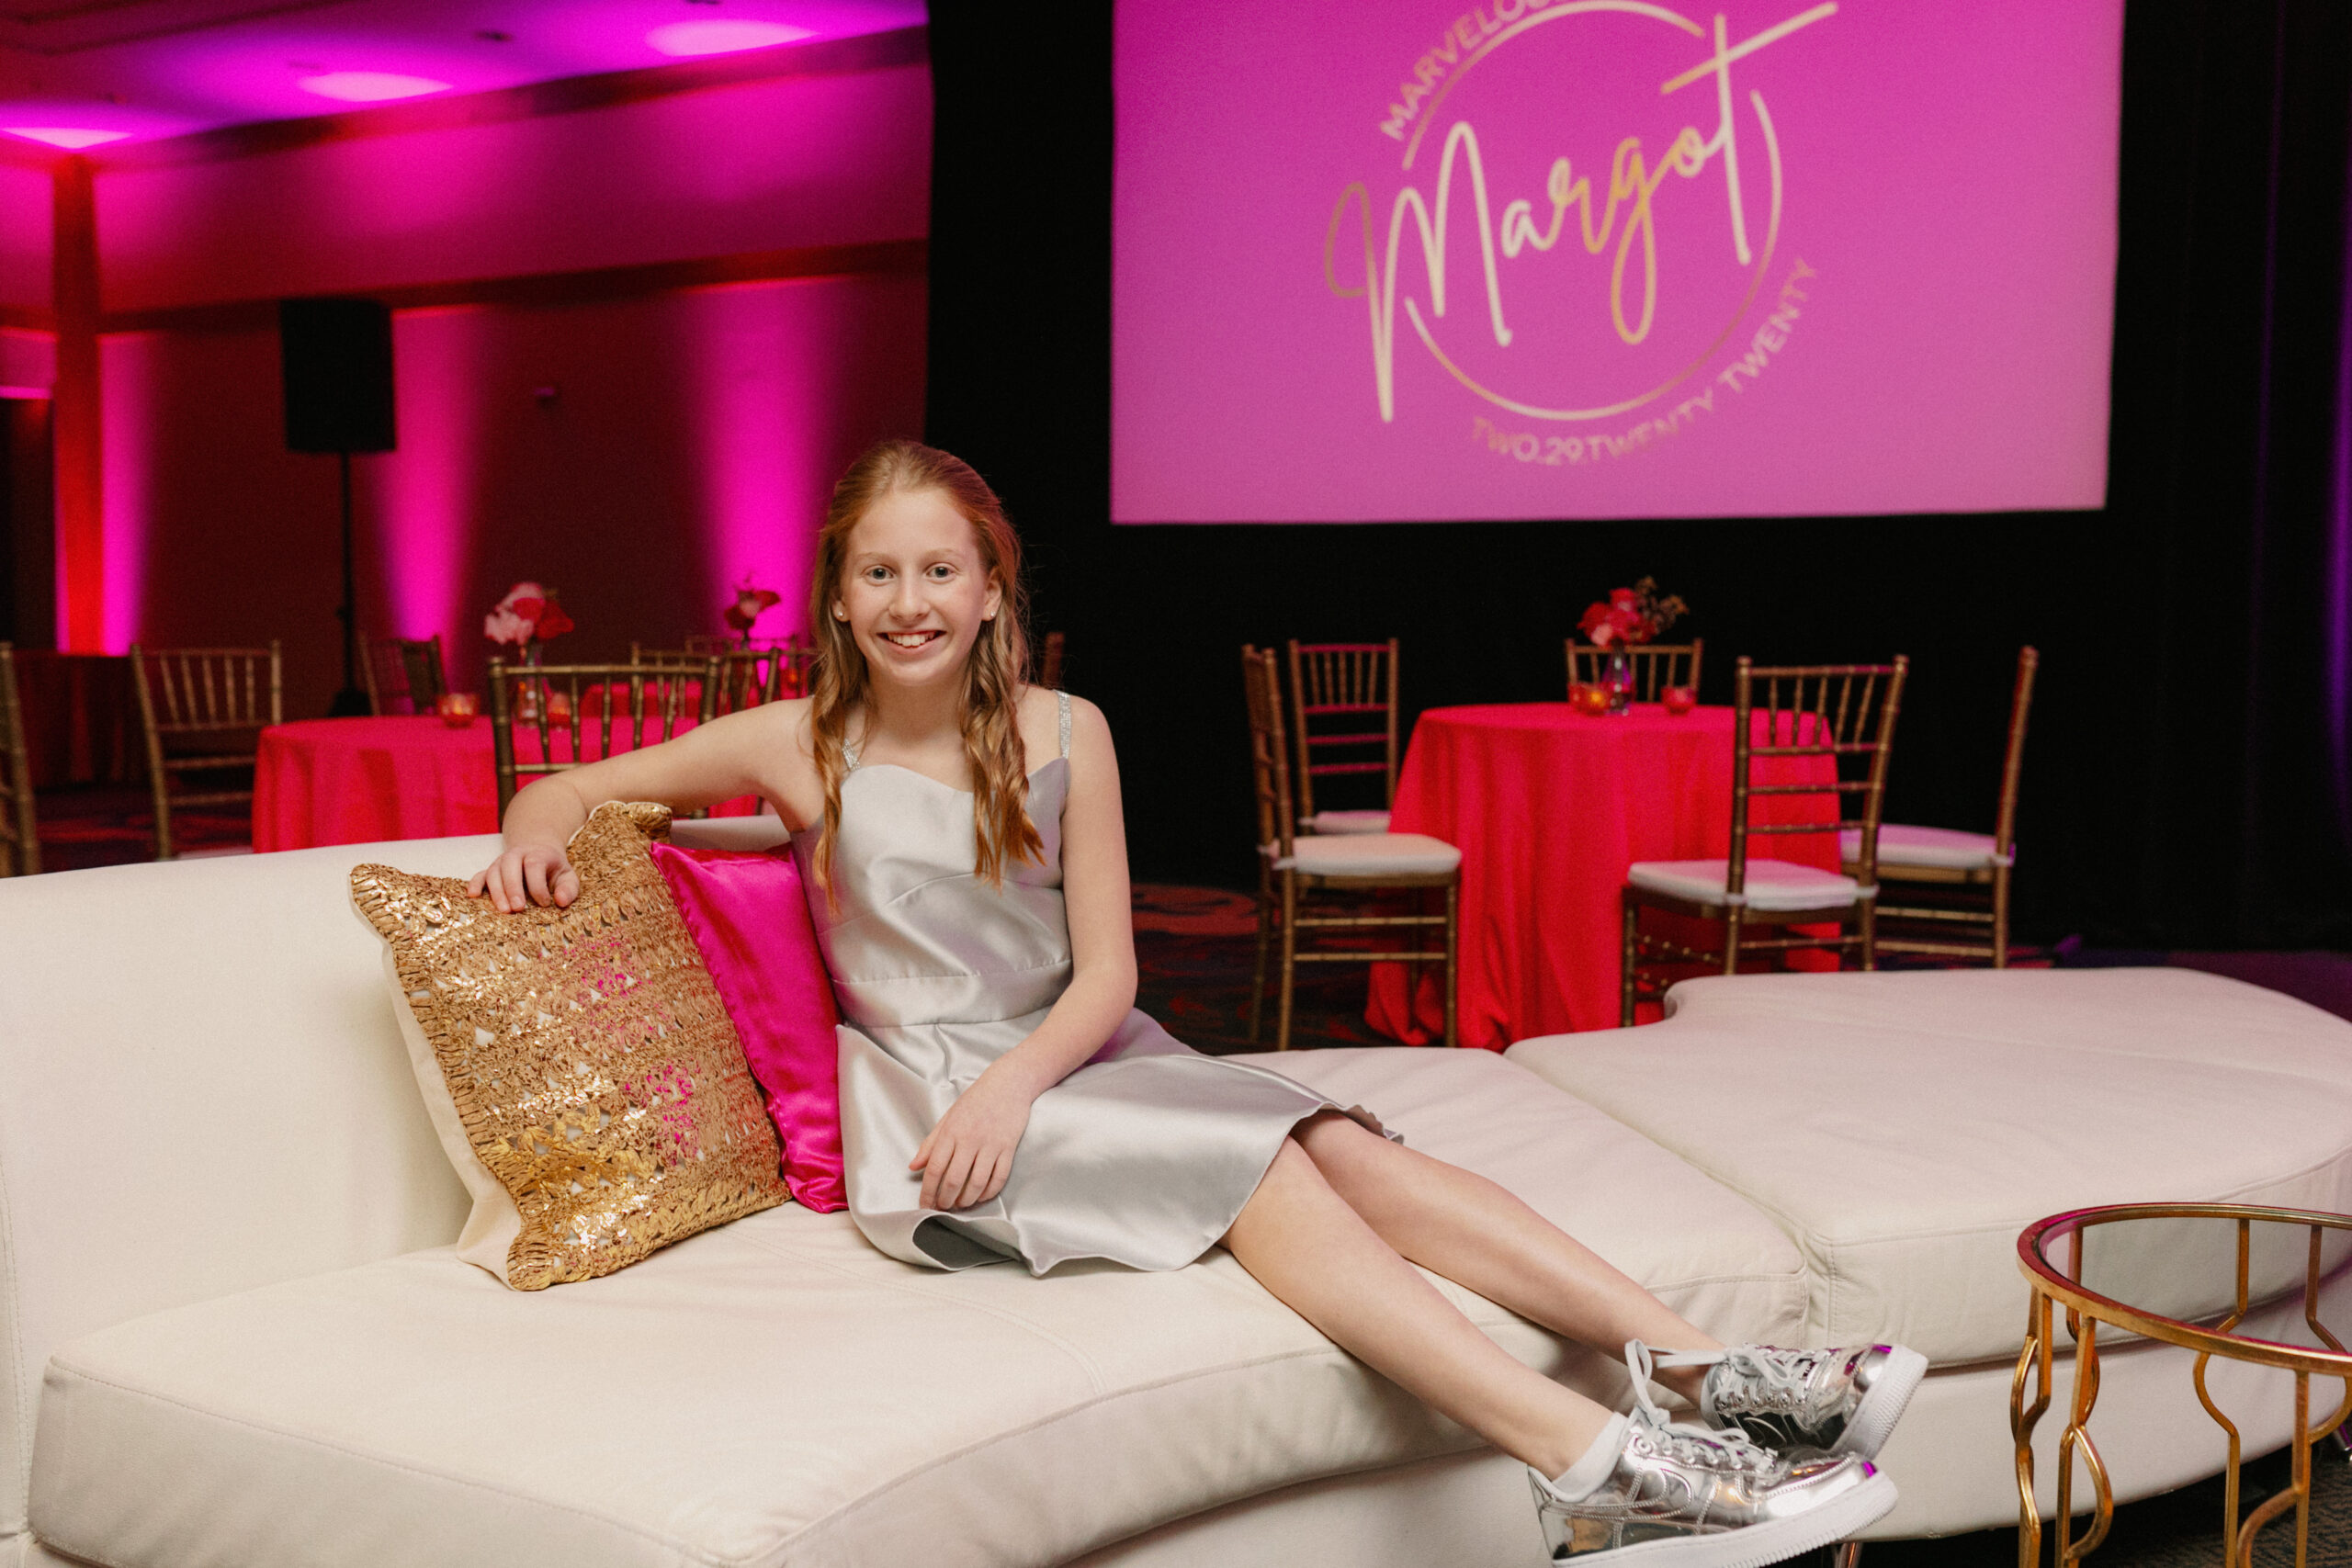 A girl poses in front of her pink themed bat mitzvah party decor.